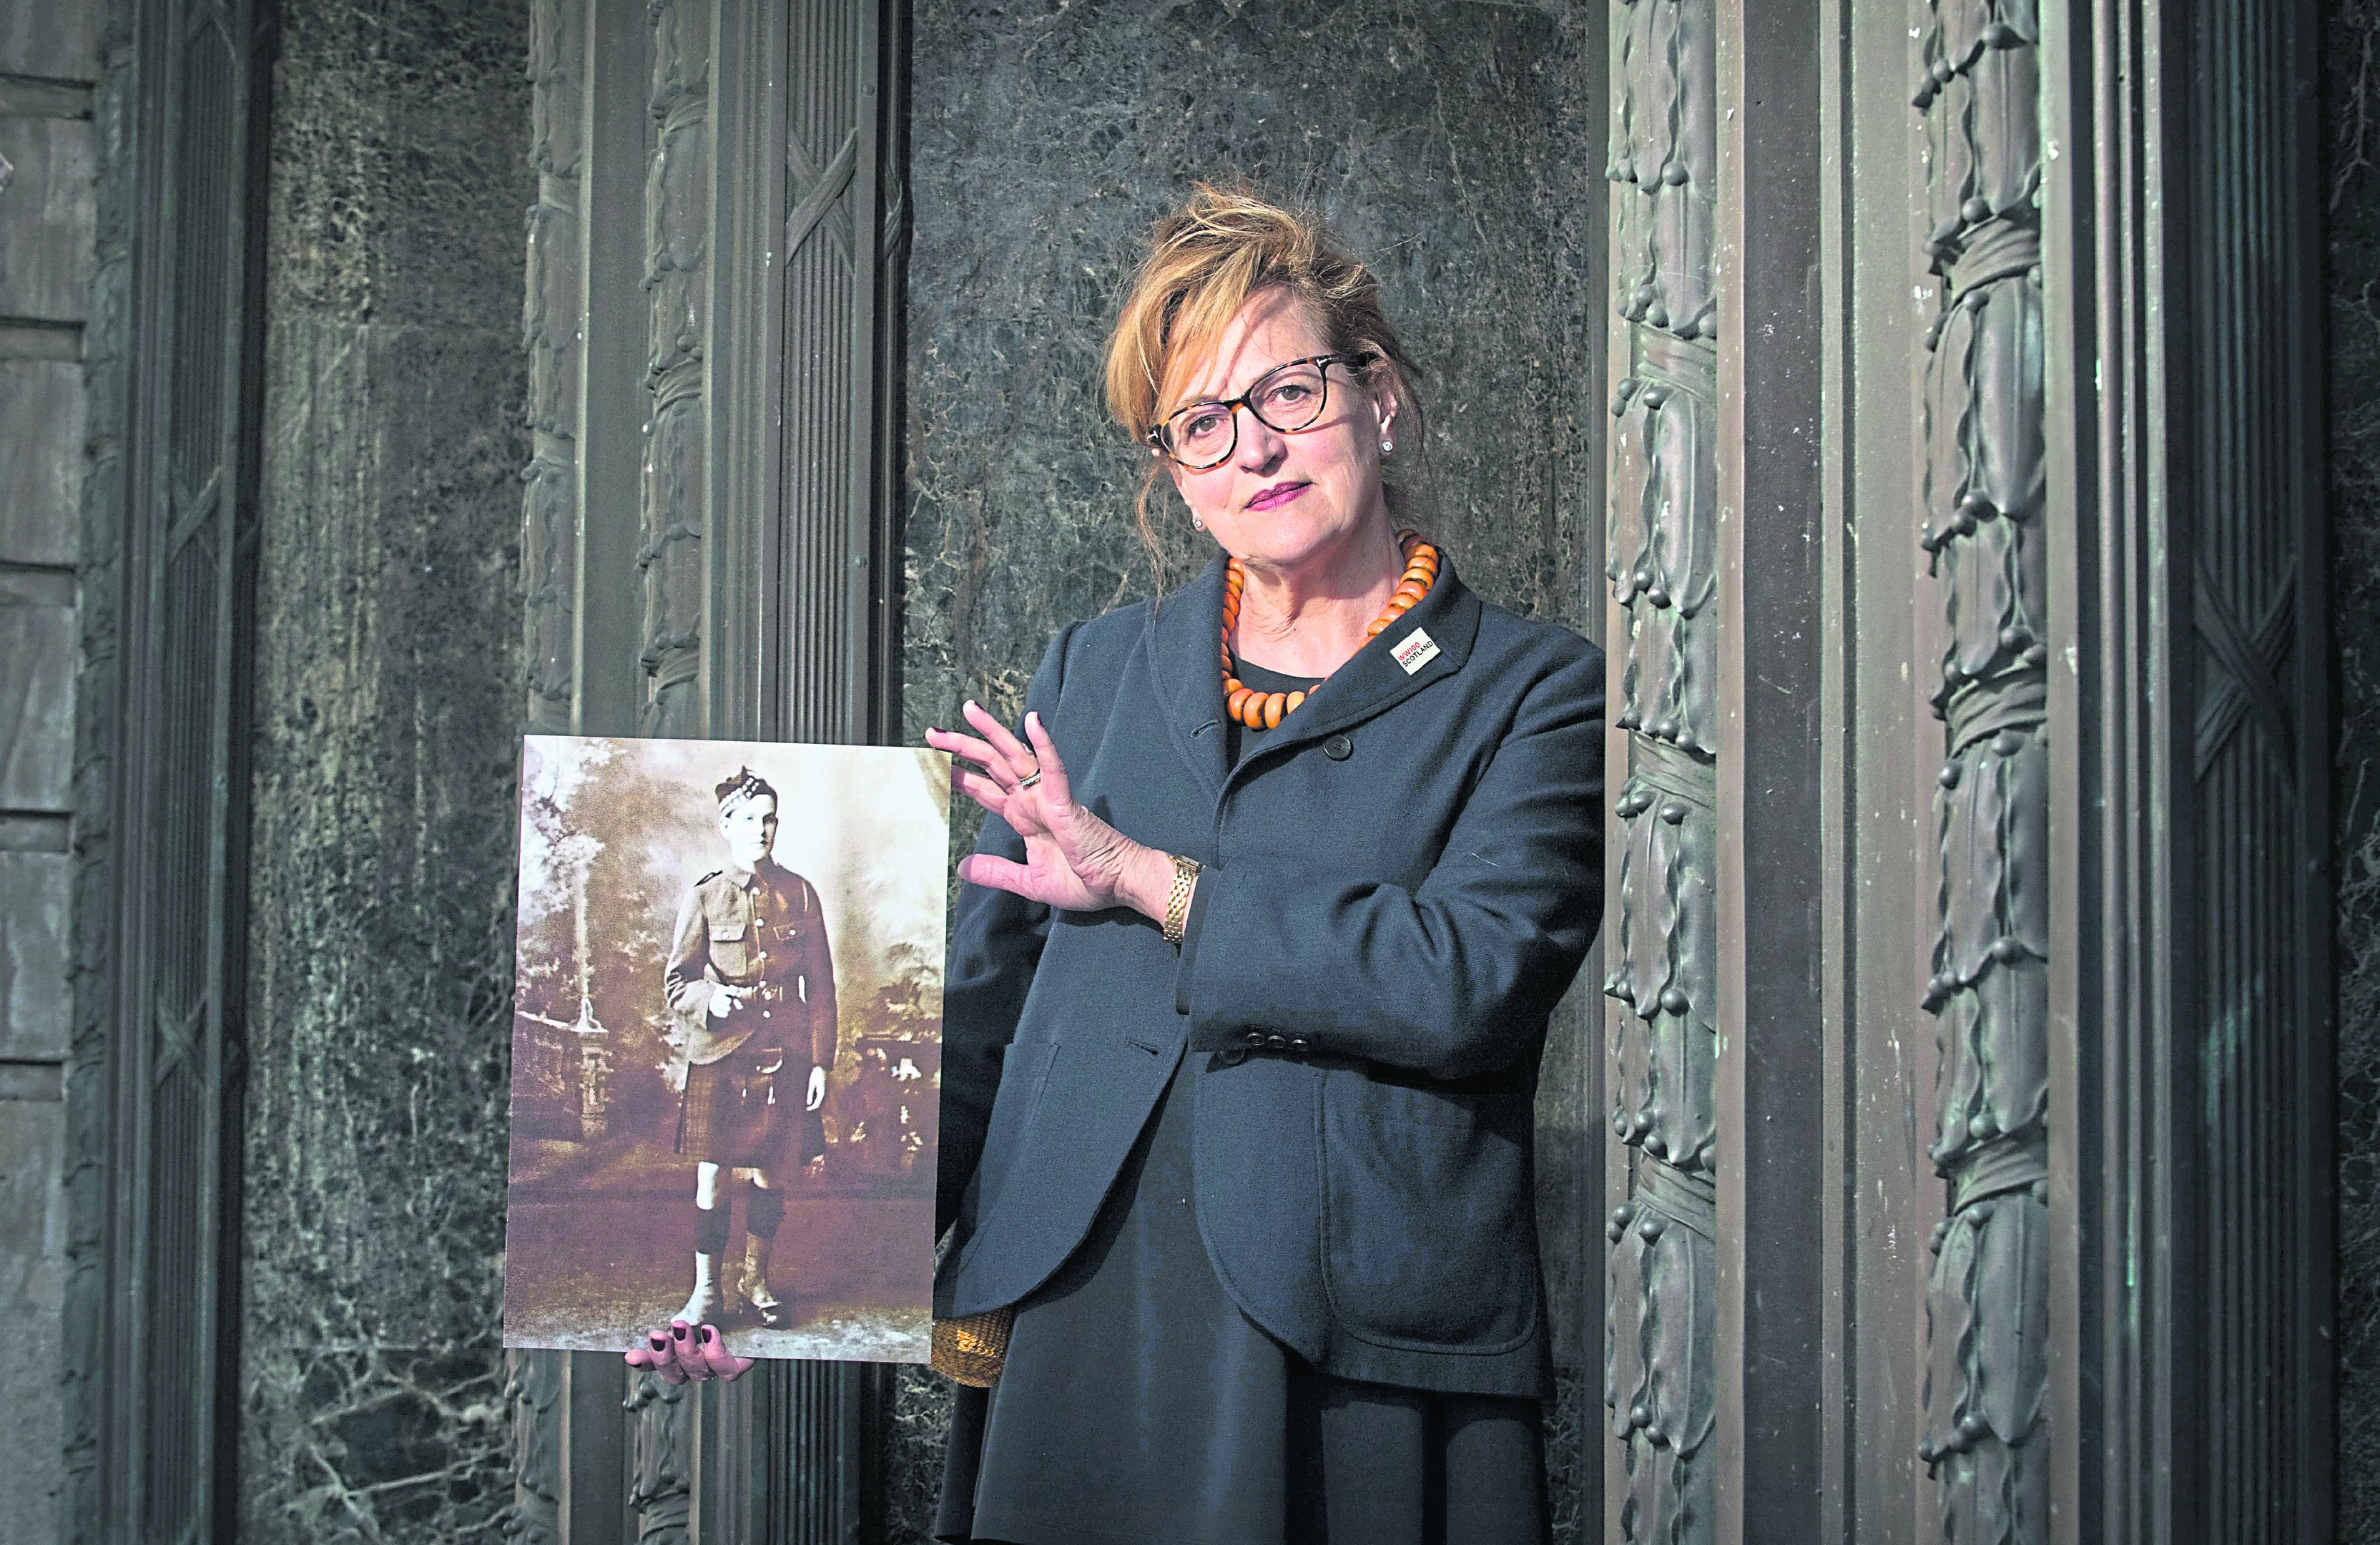 Barbara Dickson outside Edinburgh’s Usher Hall with a portrait of her uncle David Dickson, who died in the Battle of the Somme in 1916